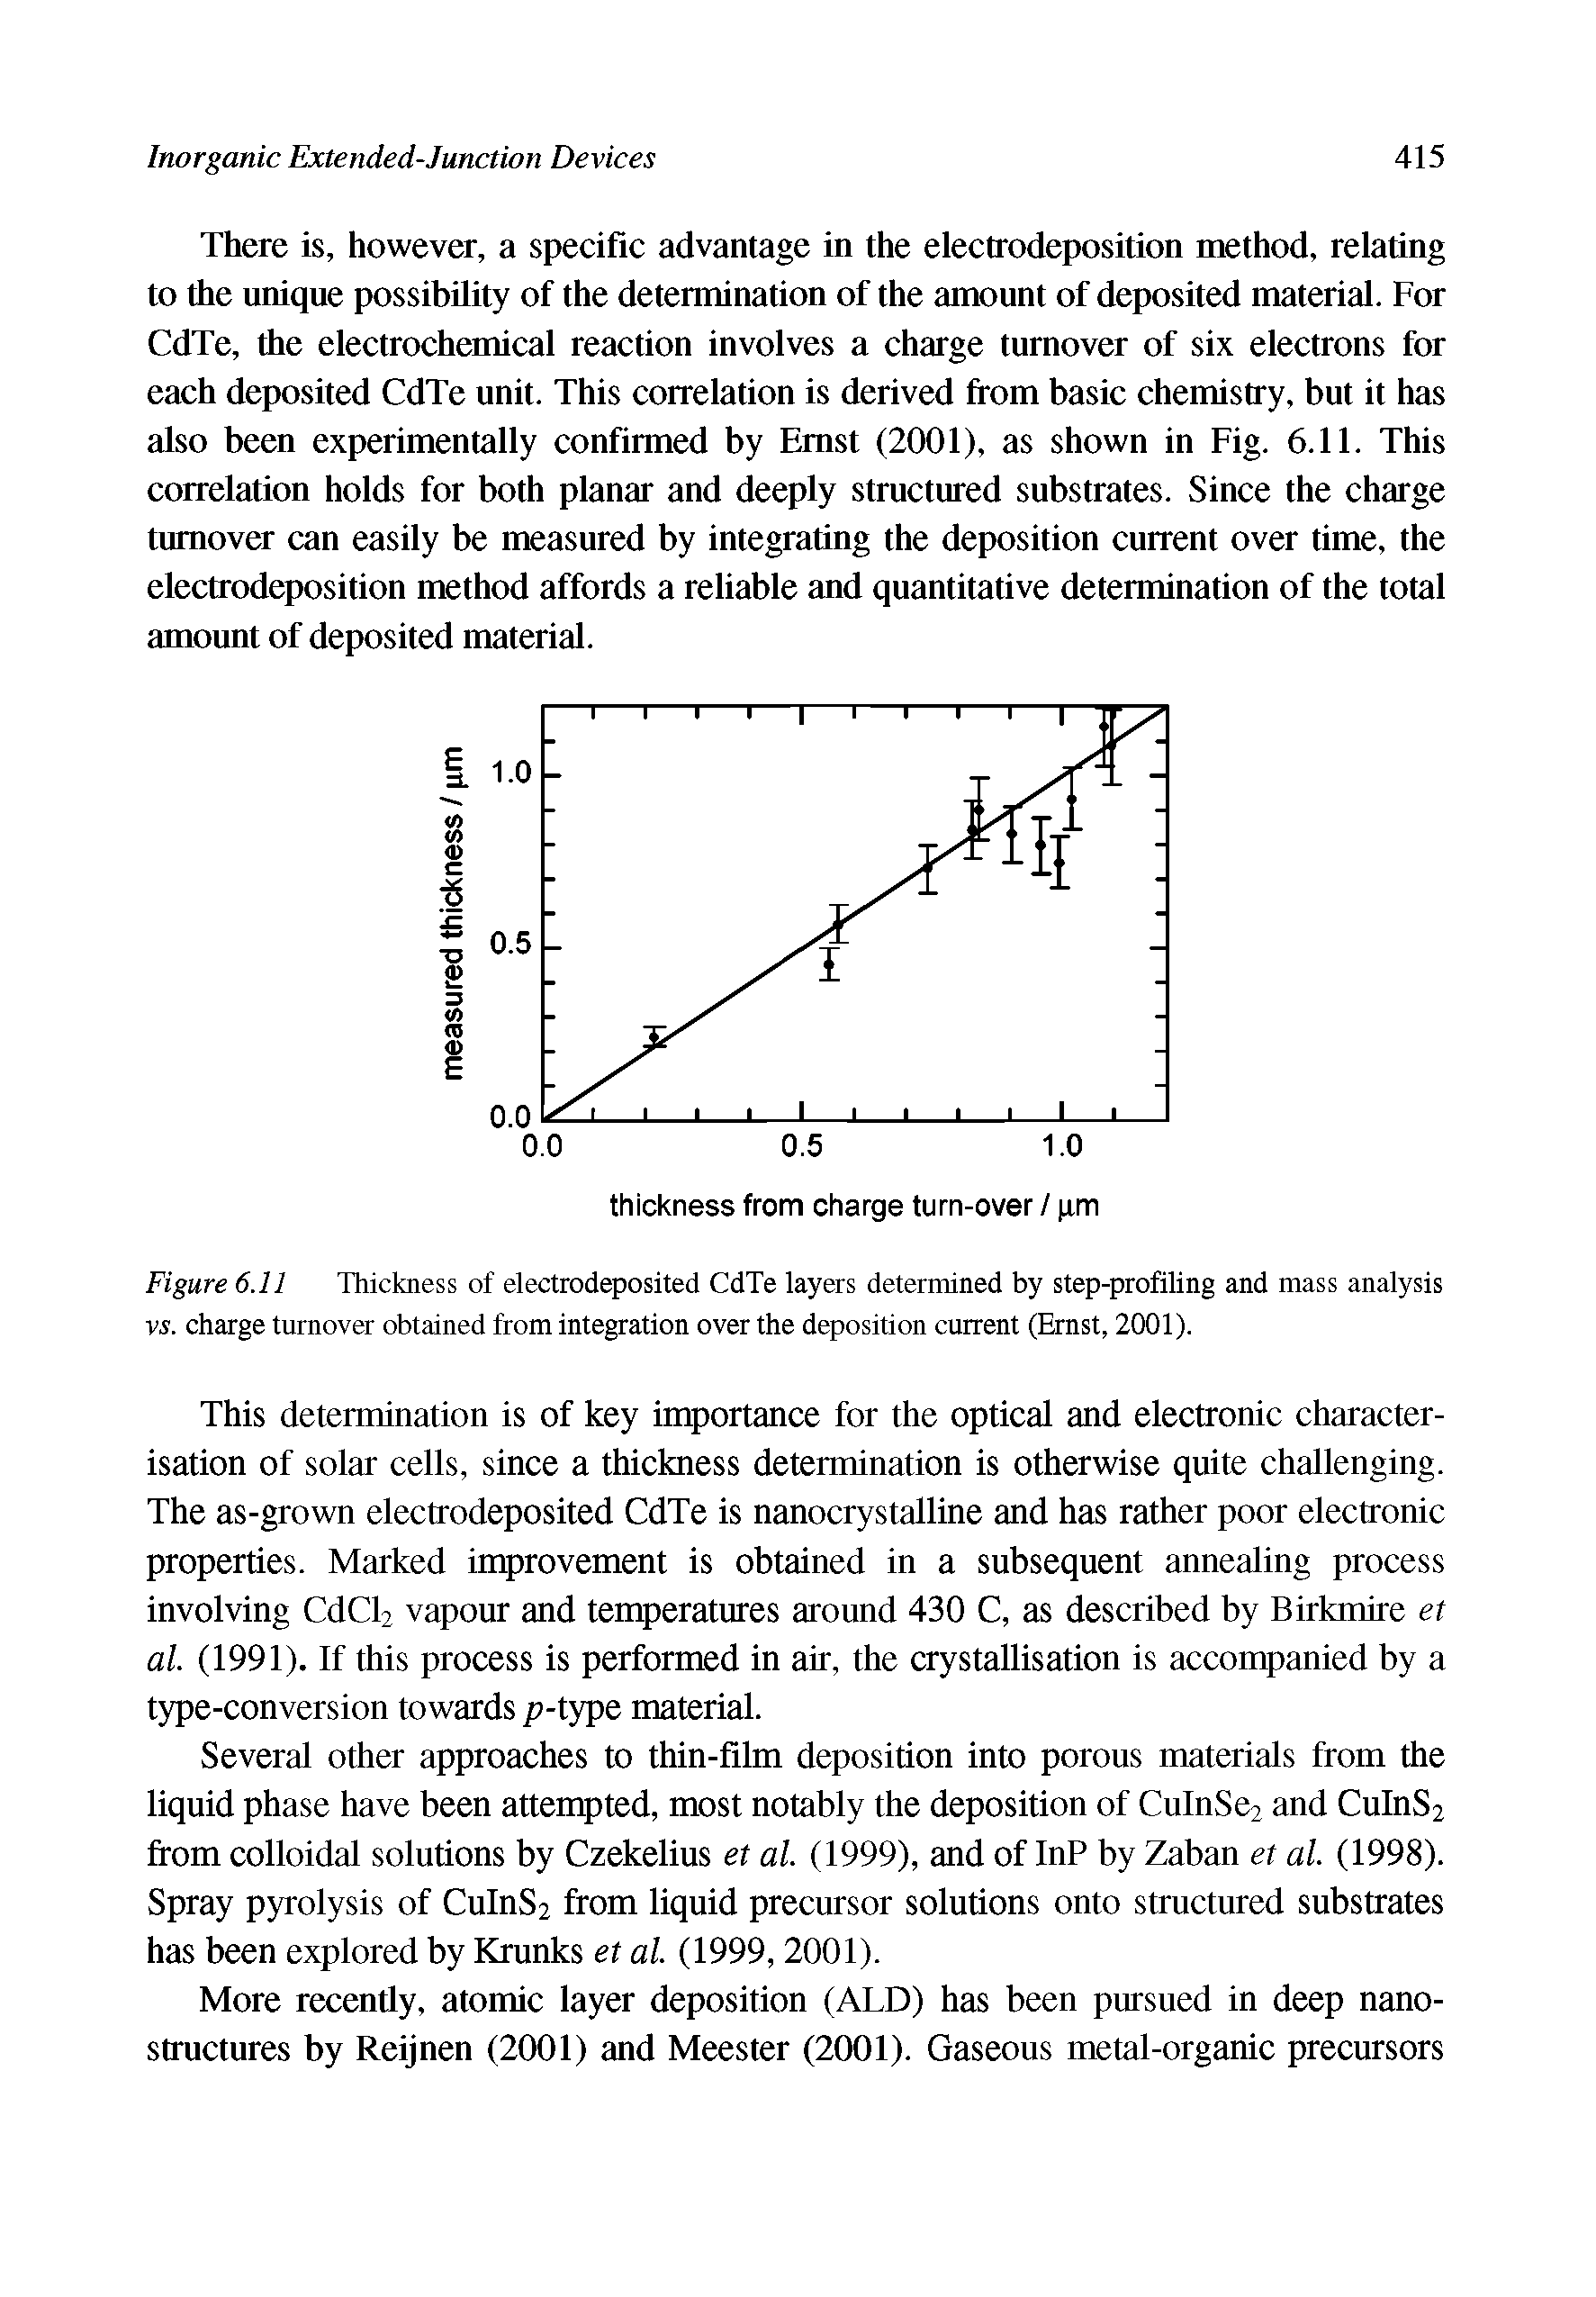 Figure 6.11 Thickness of electrodeposited CdTe layers determined by step-profiling and mass analysis vs. charge turnover obtained from integration over the deposition current (Ernst, 2001).